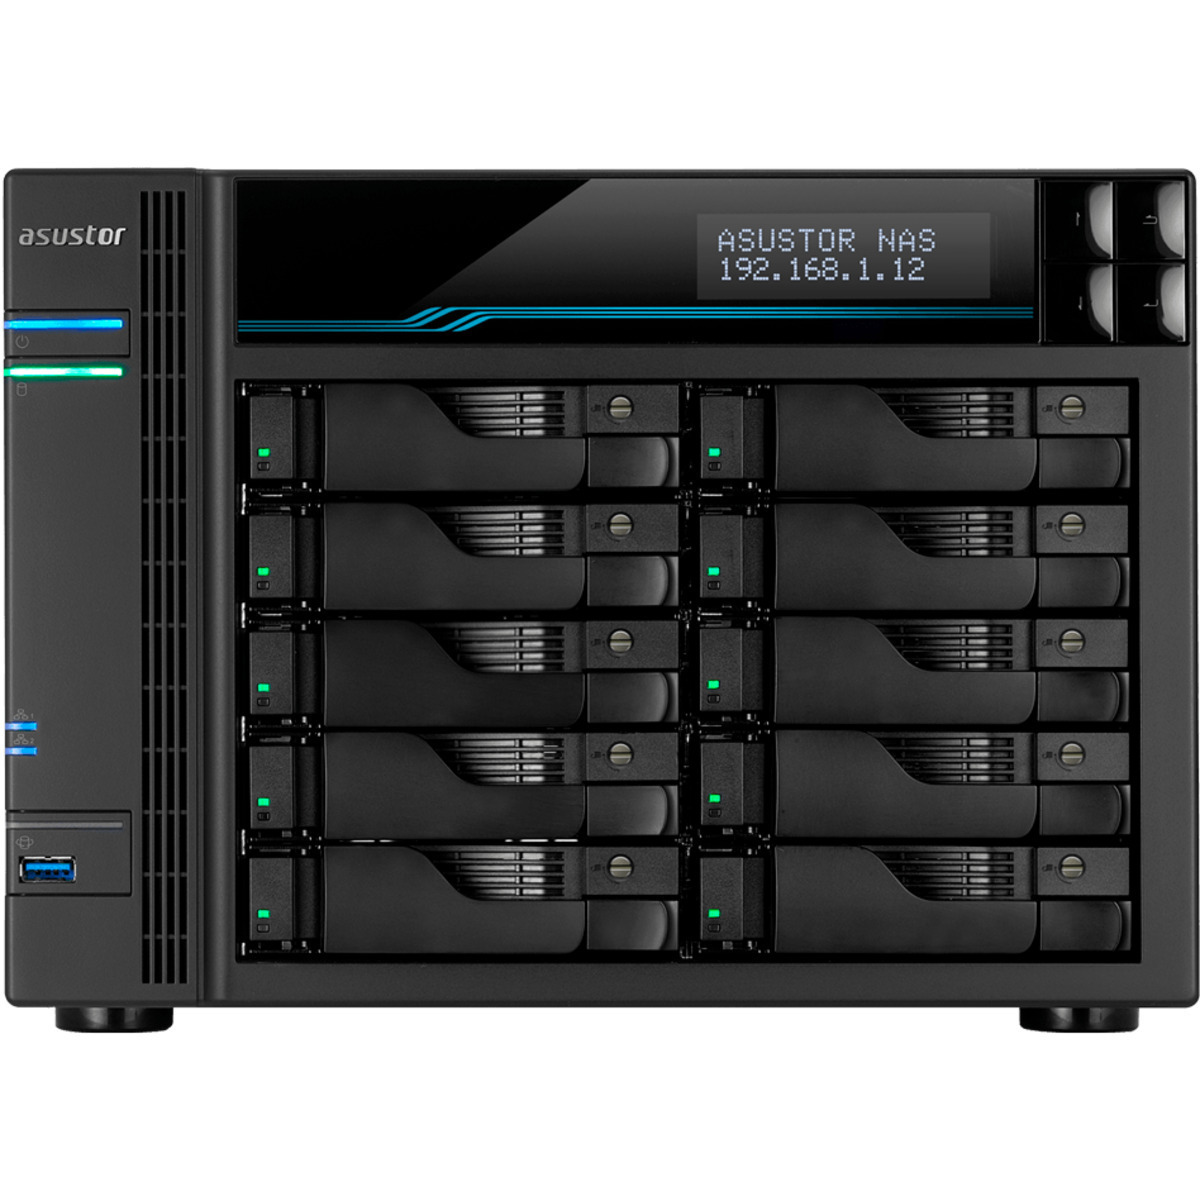 buy $5307 ASUSTOR AS7110T Lockerstor 10 Pro 80tb Desktop NAS - Network Attached Storage Device 10x8000gb Toshiba Enterprise Capacity MG08ADA800E 3.5 7200rpm SATA 6Gb/s HDD ENTERPRISE Class Drives Installed - Burn-In Tested - ON SALE - nas headquarters buy network attached storage server device das new raid-5 free shipping usa christmas new year holiday sale AS7110T Lockerstor 10 Pro